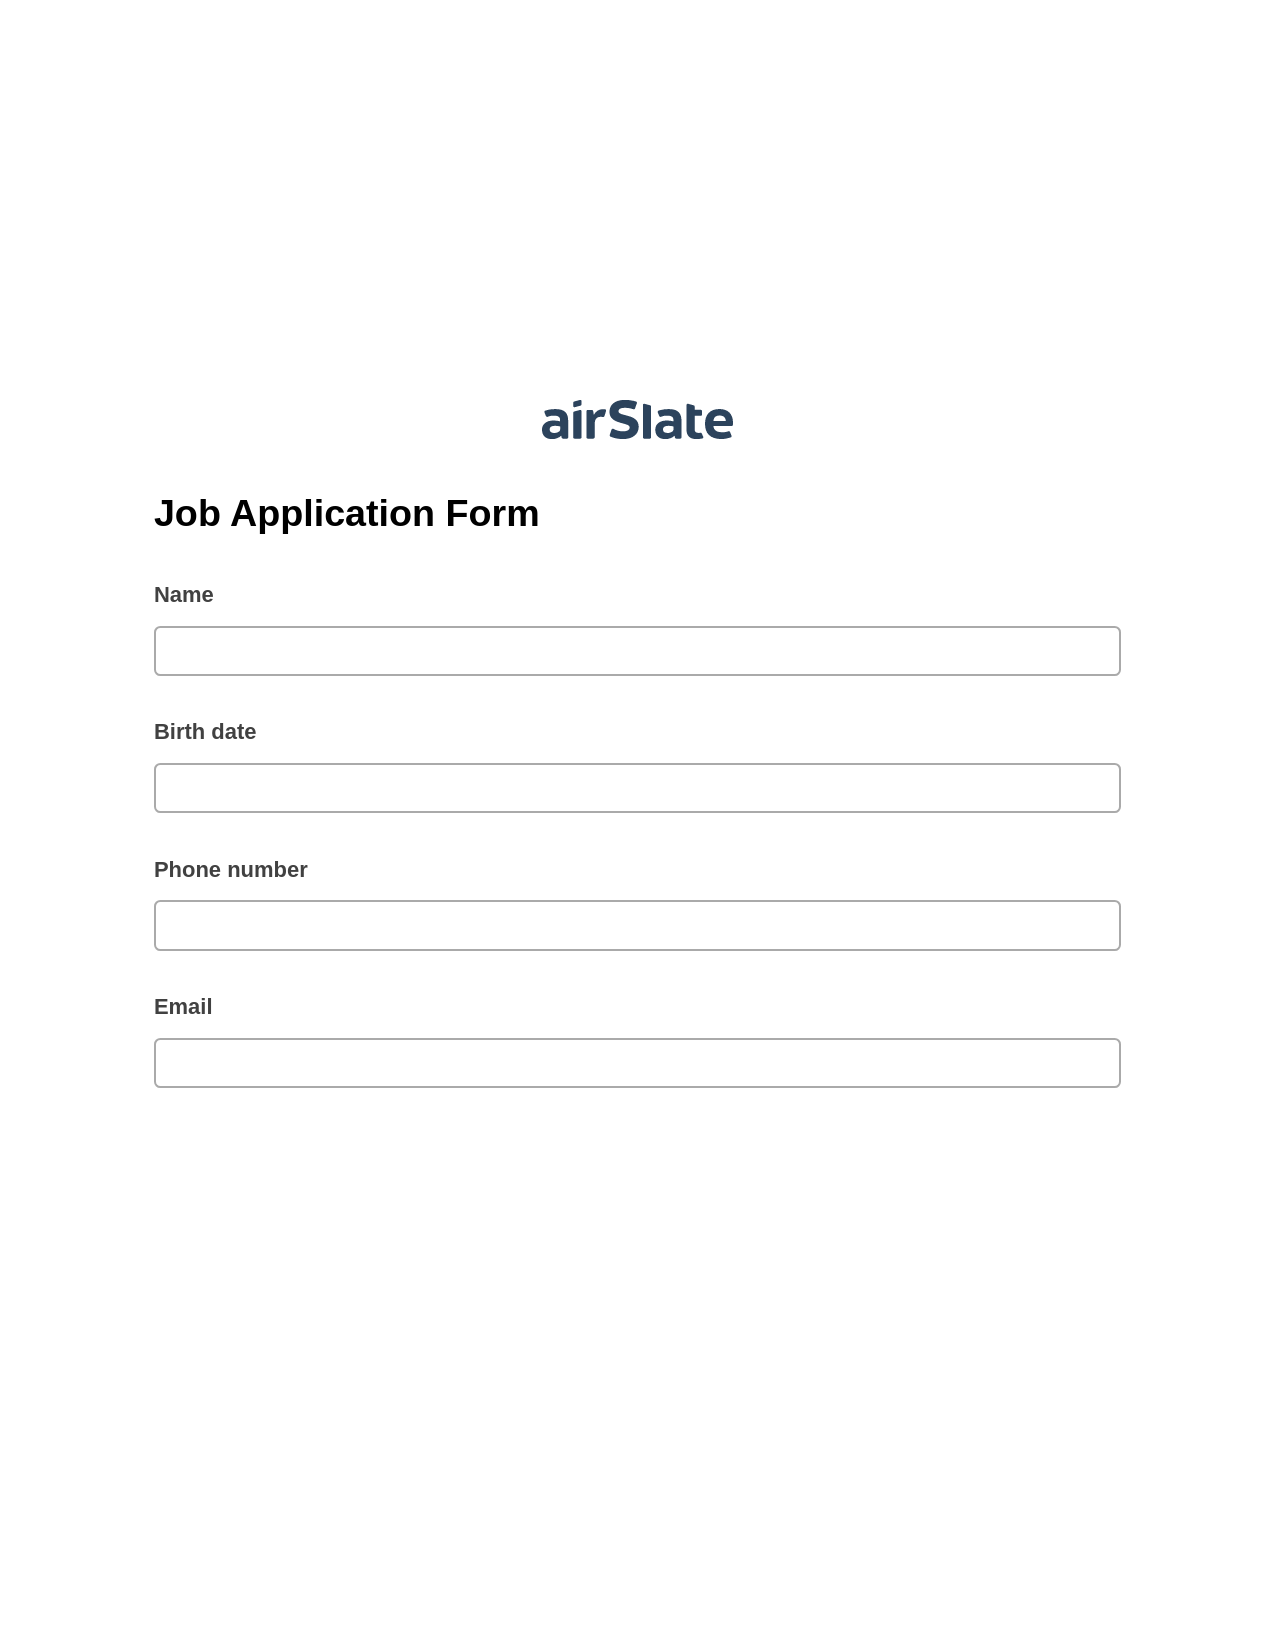 Multirole Job Application Form Pre-fill from Excel Spreadsheet Dropdown Options Bot, Create MS Dynamics 365 Records Bot, Post-finish Document Bot